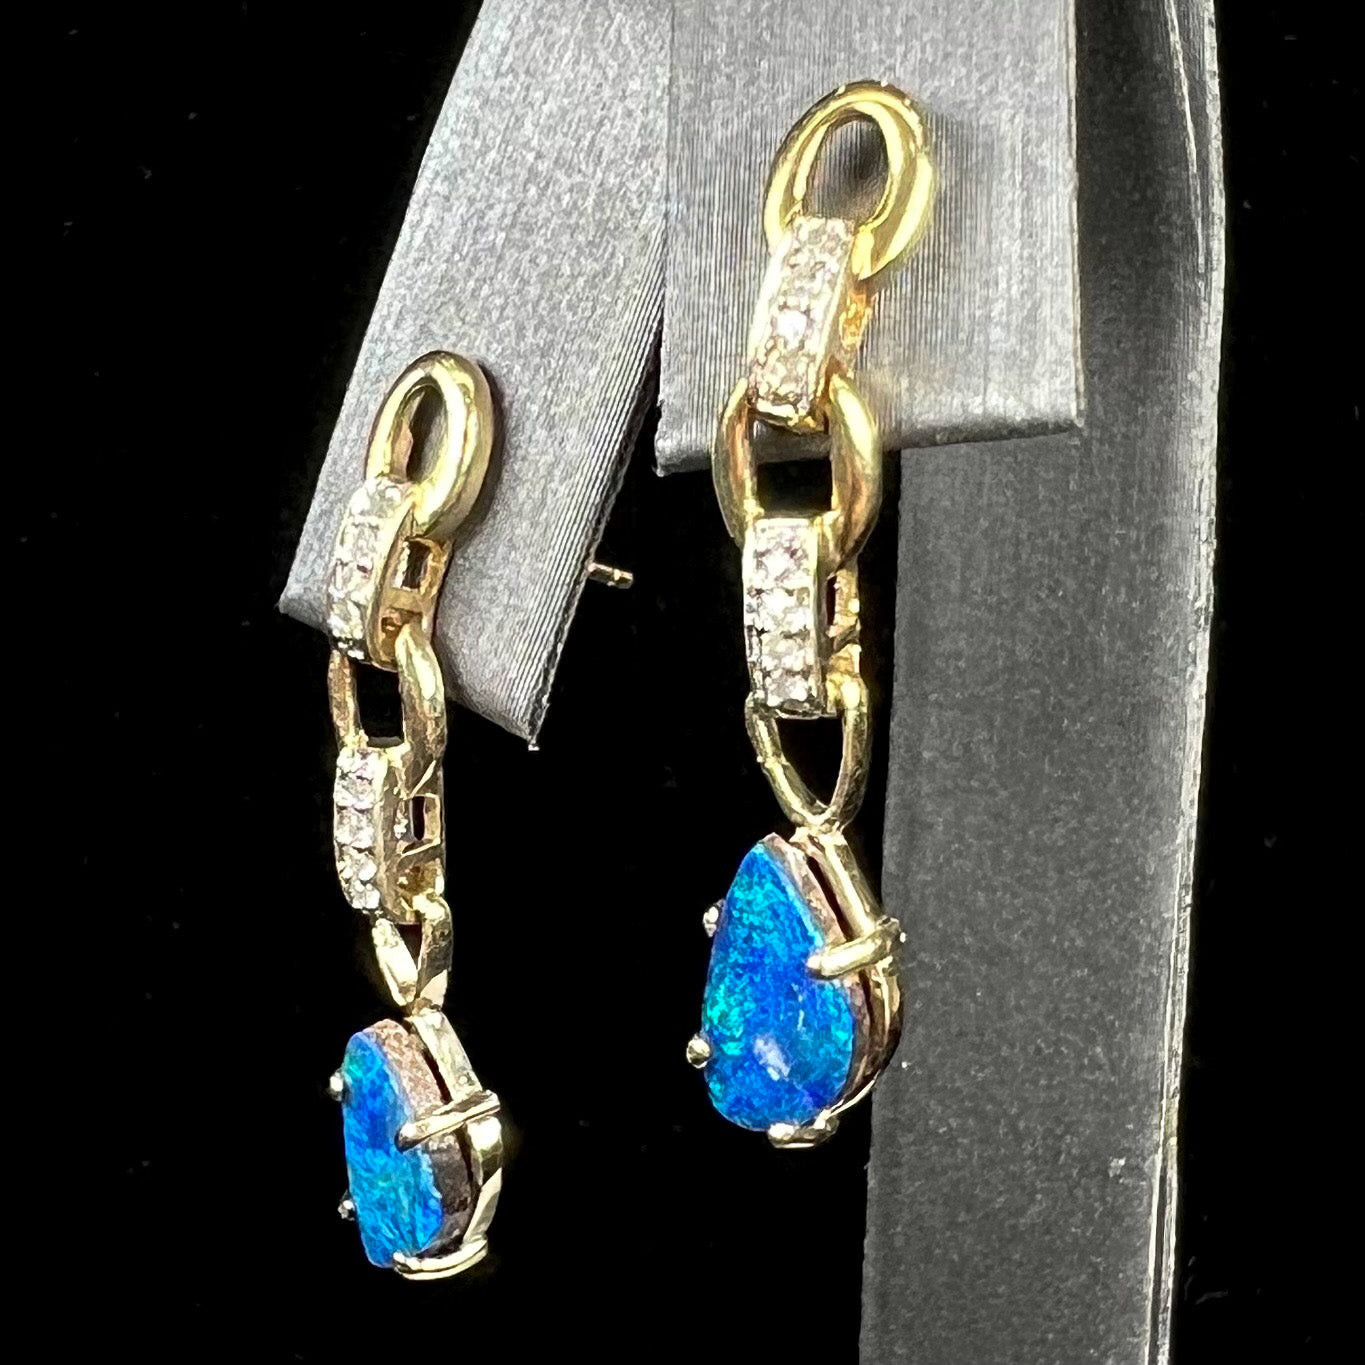 A pair of black opal doublet dangle earrings set in 10kt yellow gold with diamond accents.